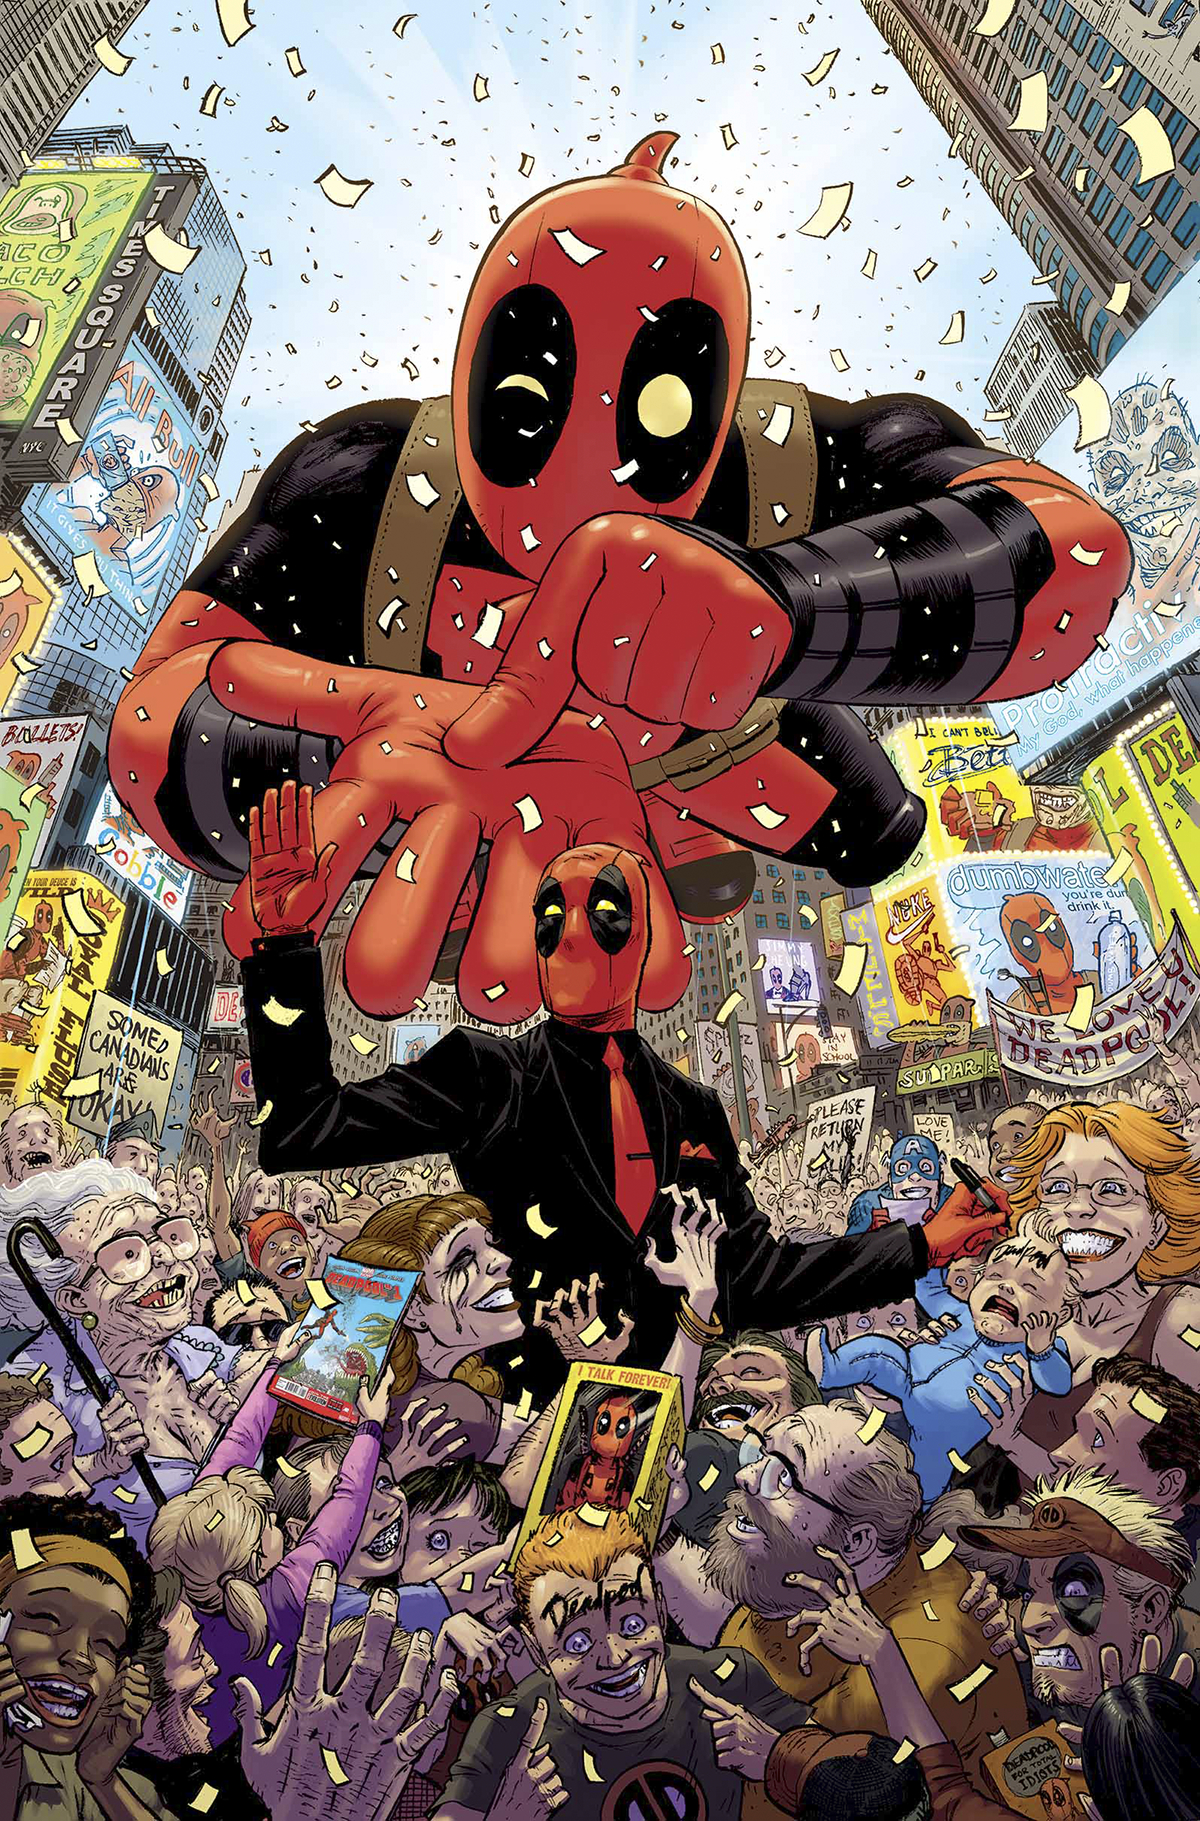 DEADPOOL #1 BY MOORE POSTER